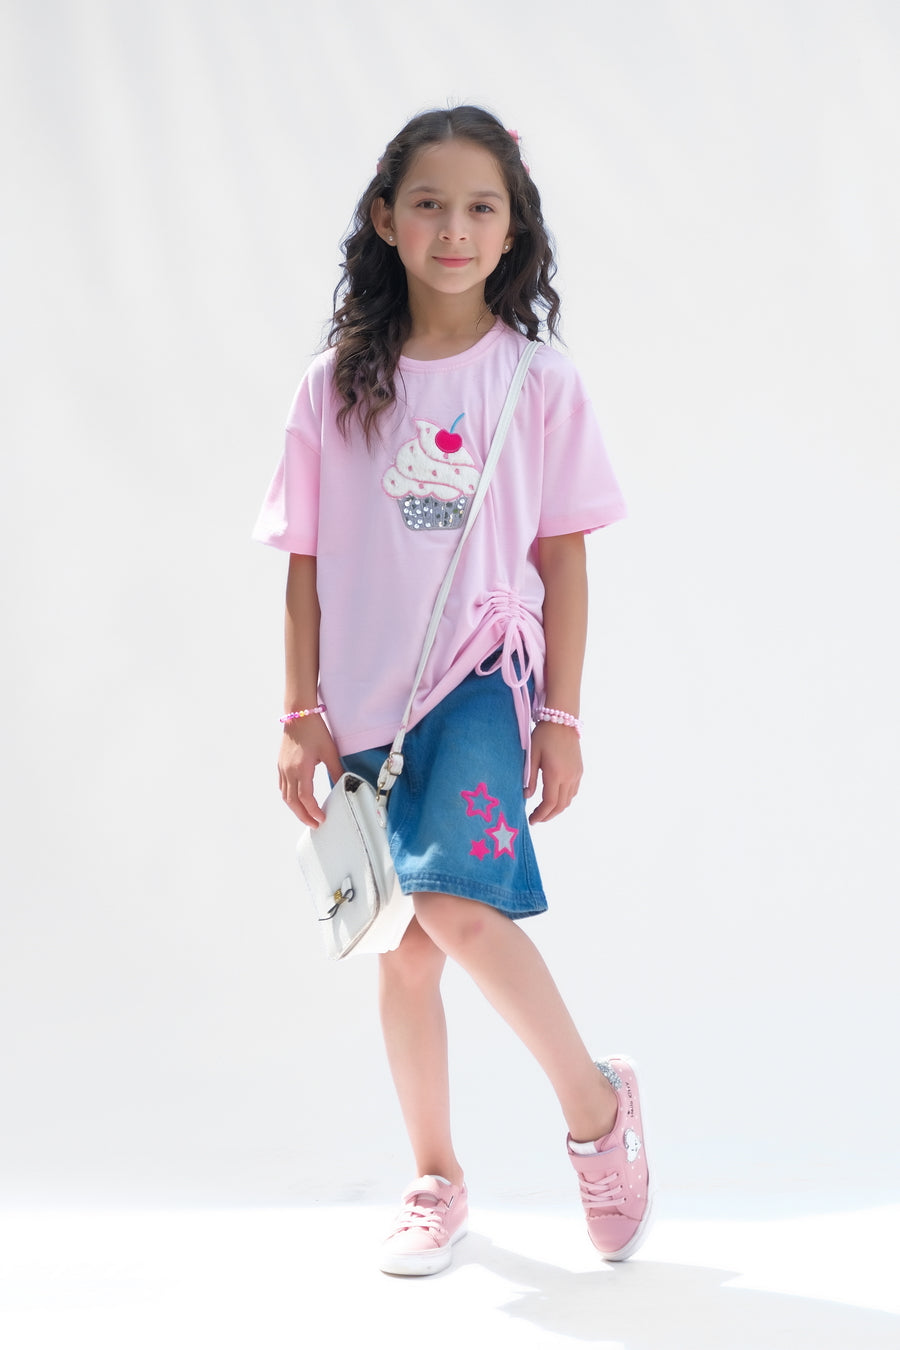 Cupcake with embroidery - Half sleeves T-shirts For Kids - Pink - SBT-361